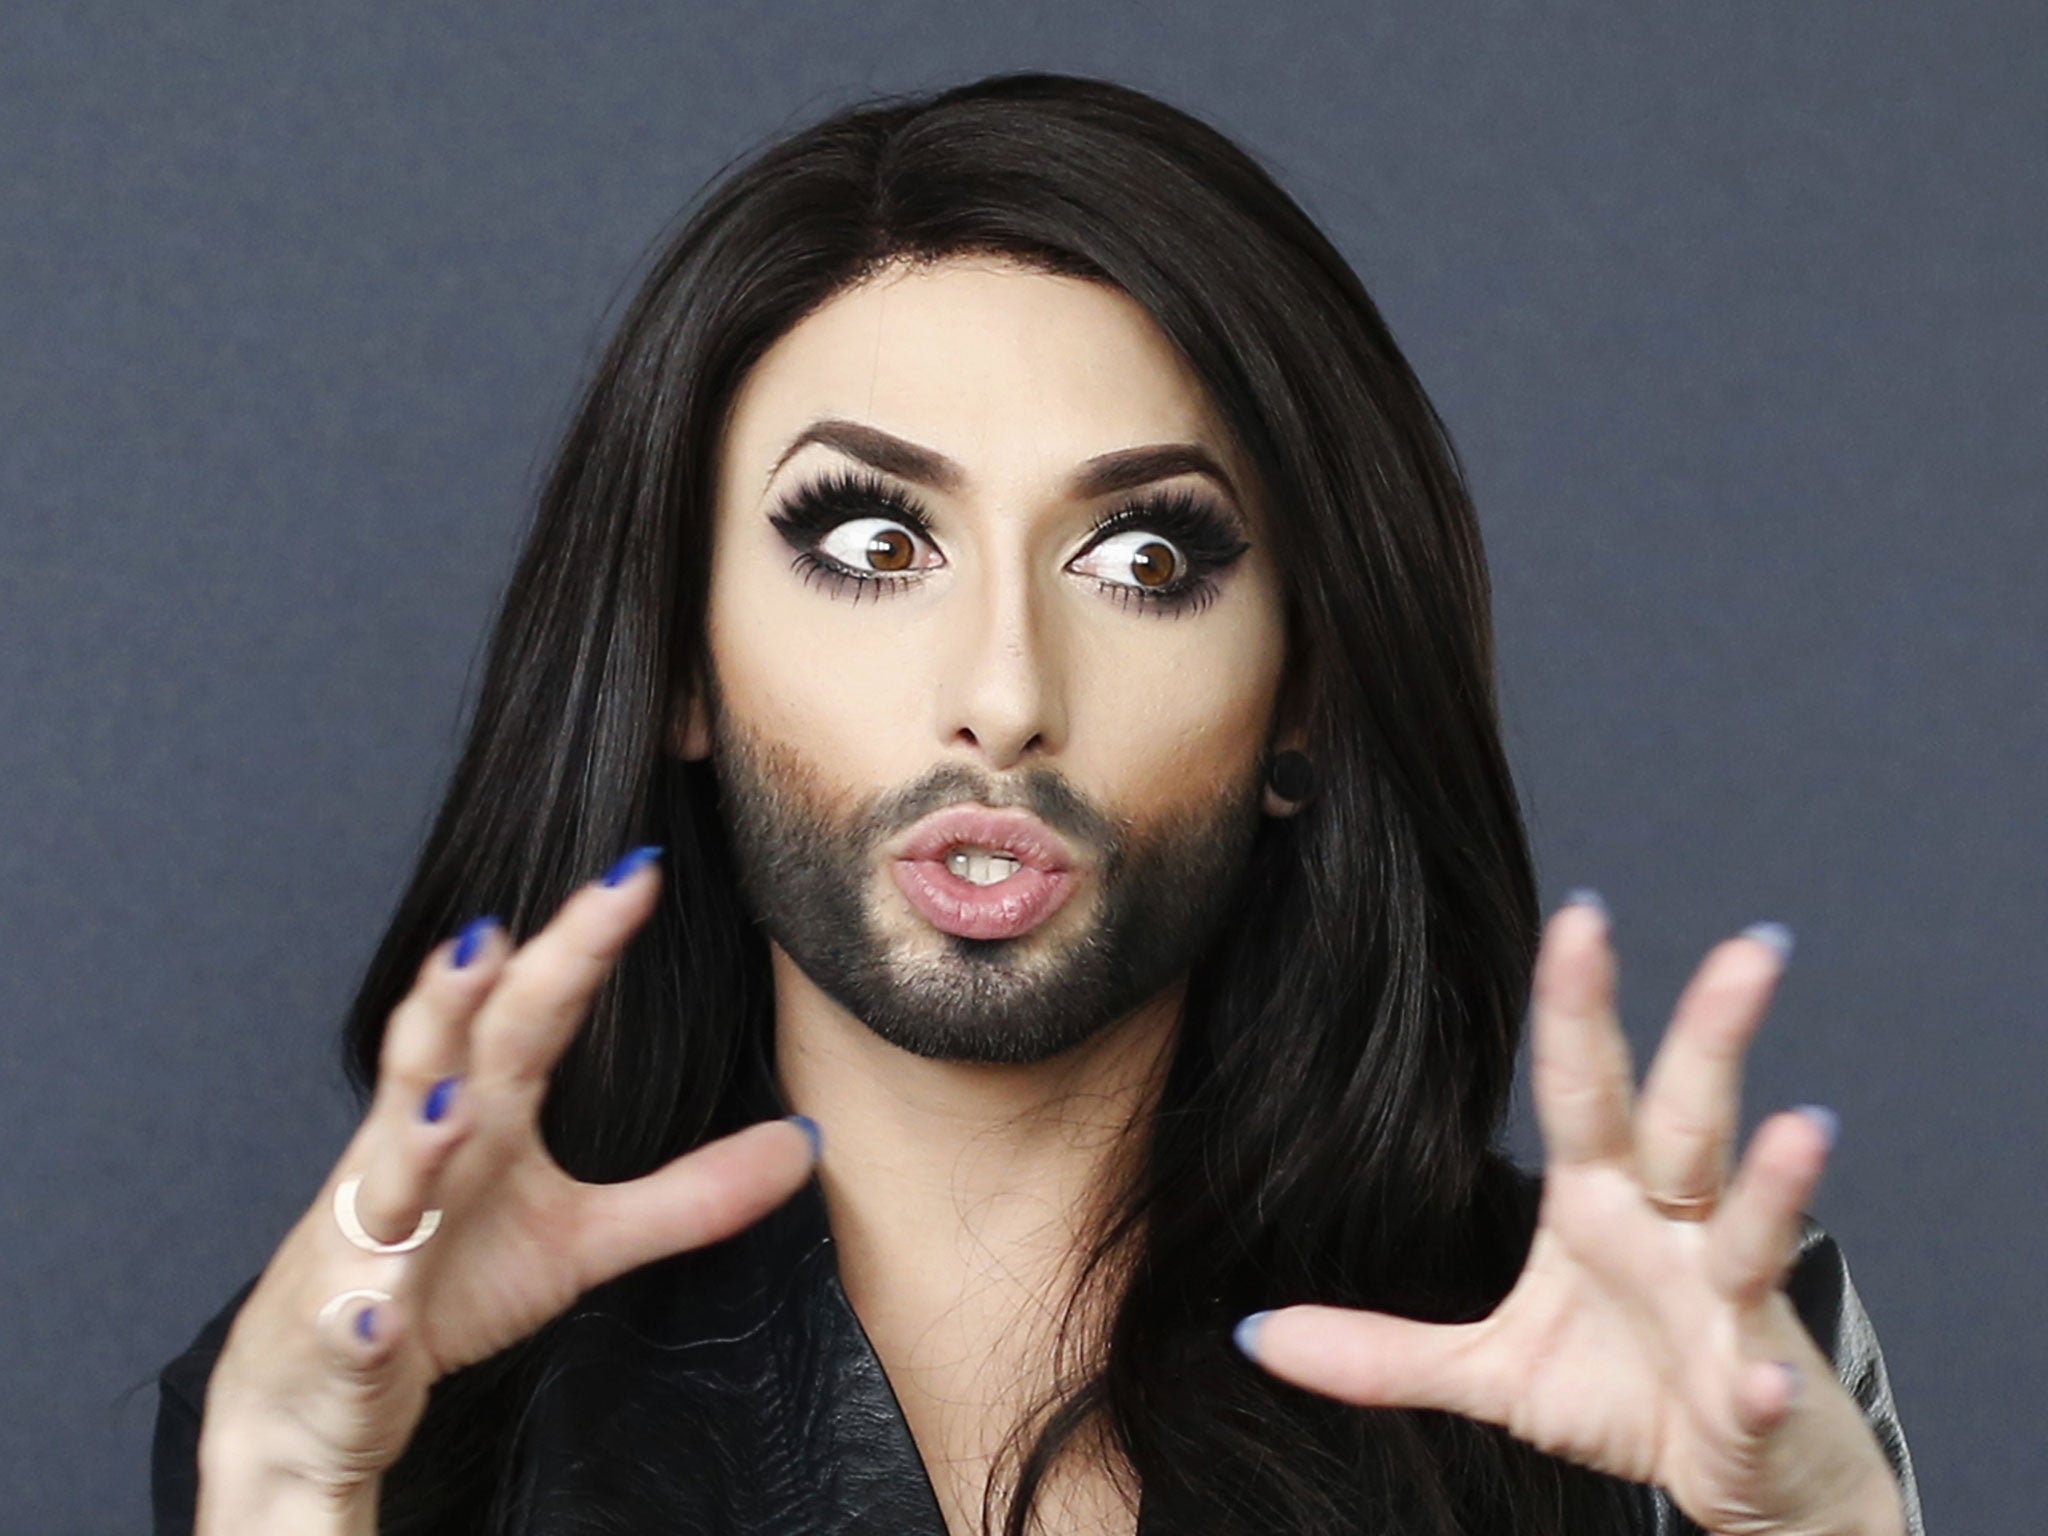 Eurovision 2014 Austrias Conchita Wurst Hits Back At Transphobic Criticism And Defends The 